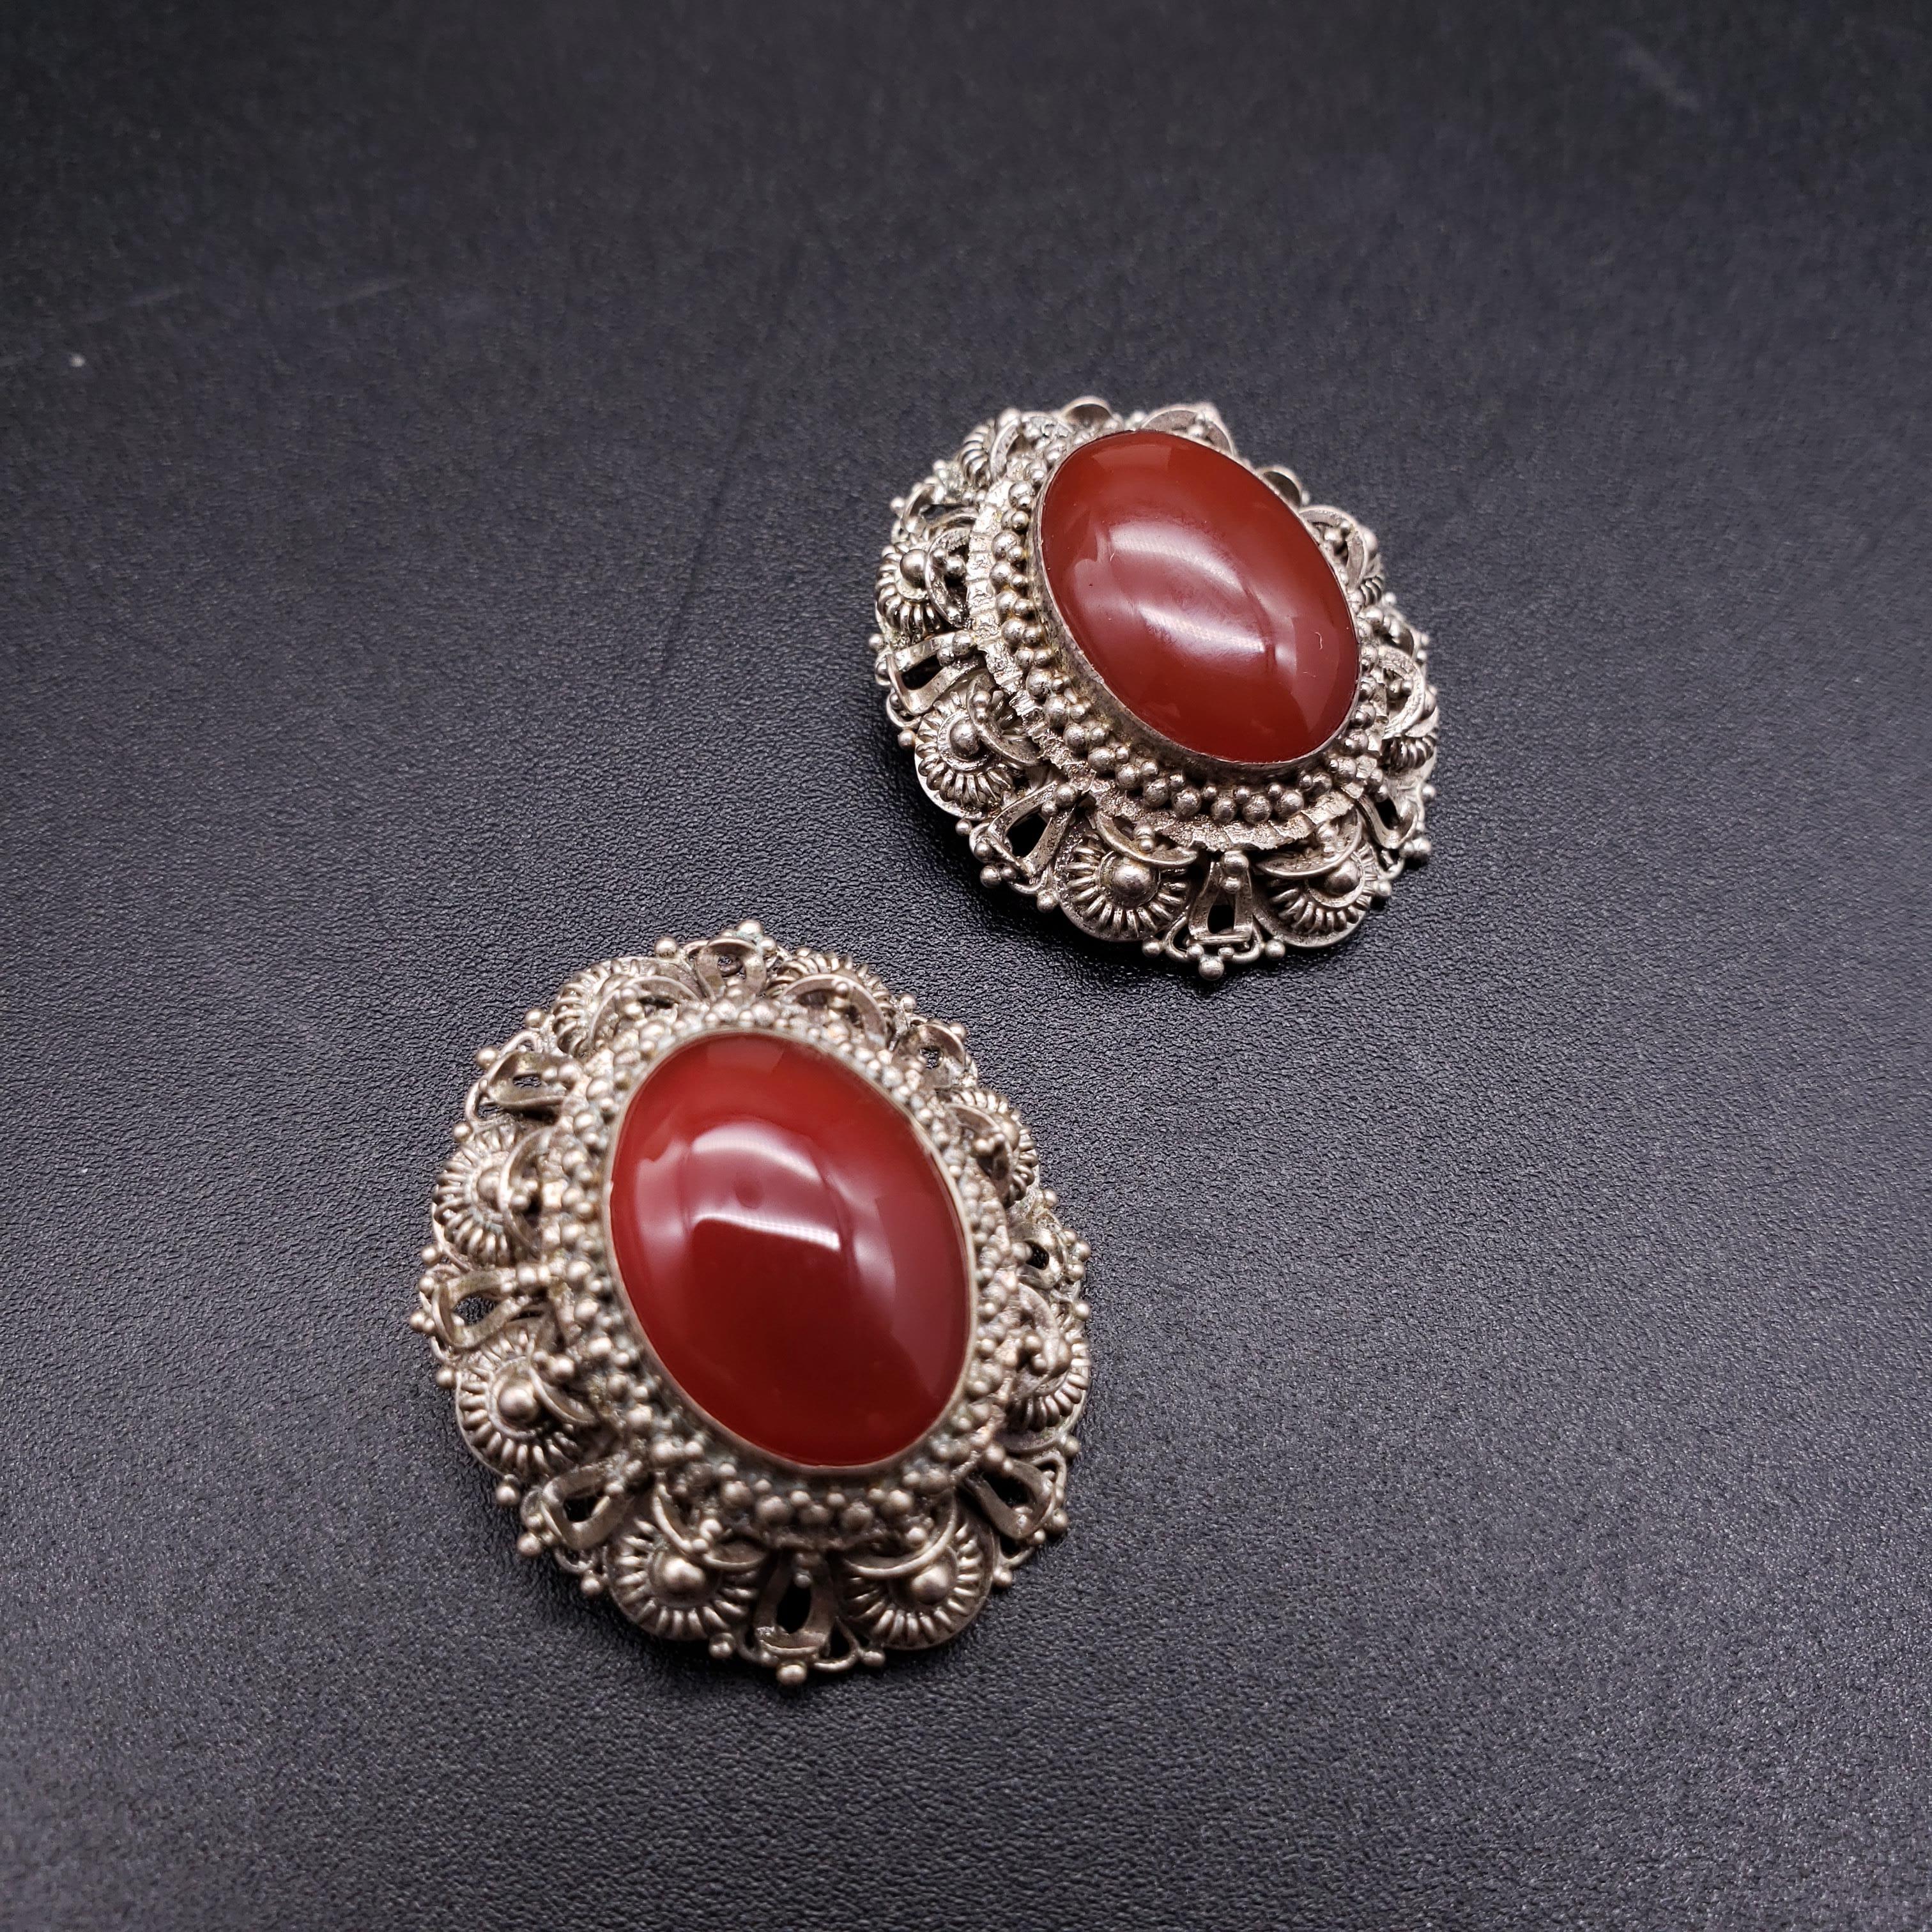 Oval Cut Sterling Filigree Oval Carnelian Victorian Brooch Pendant and Clip on Earrings For Sale